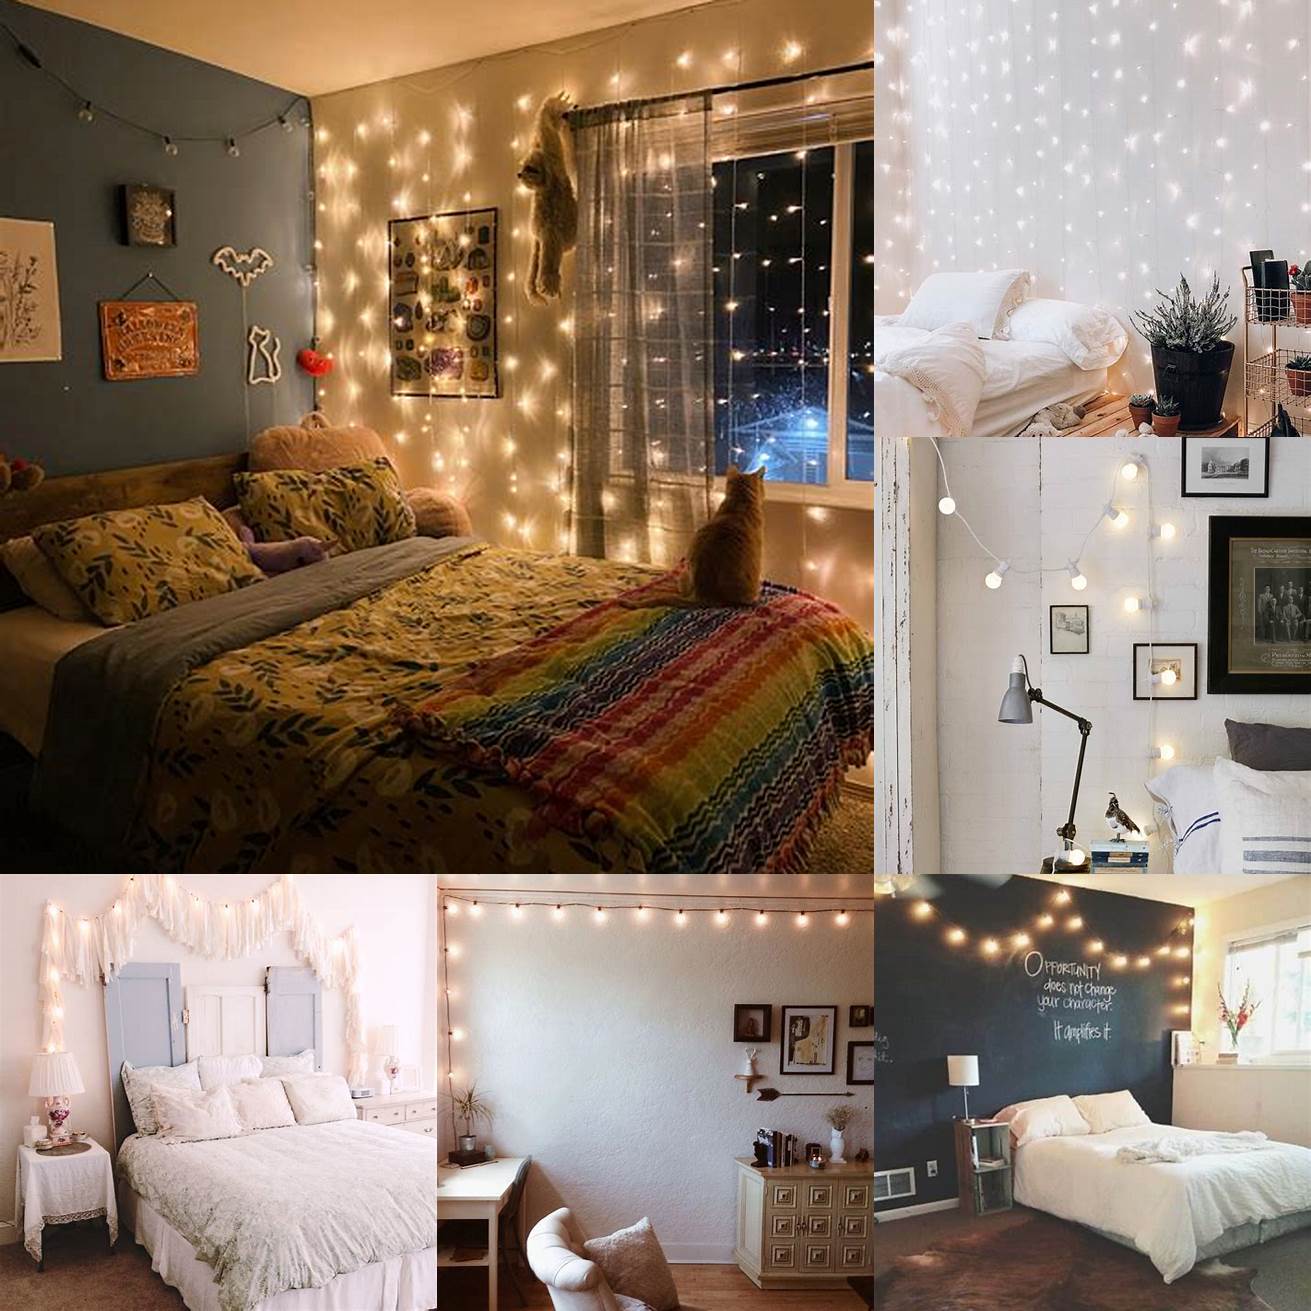 This colorful bedroom uses string lights to add a cozy and inviting touch to the space